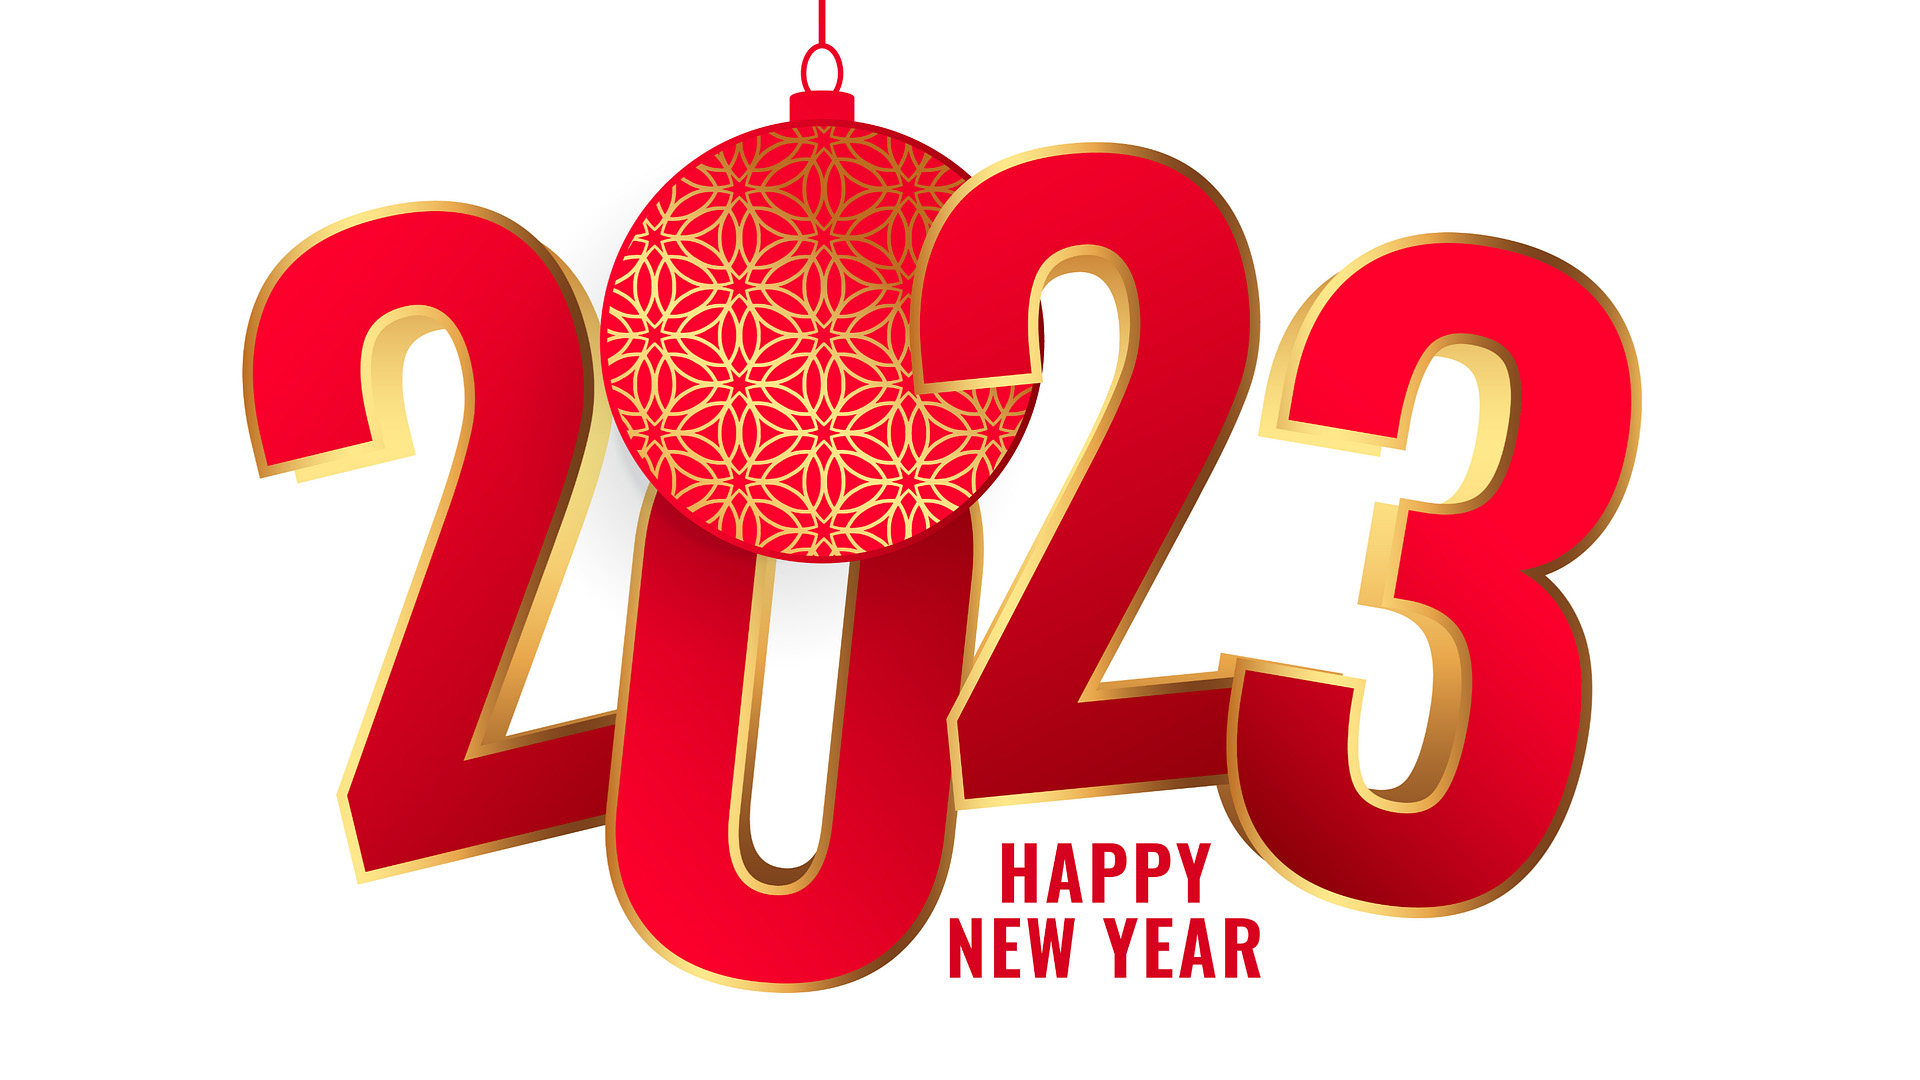 White background with a red and gold 3D text that reads 2023, which are overlapping each other. and toward the bottom in a smaller font it reads "Happy New Year"